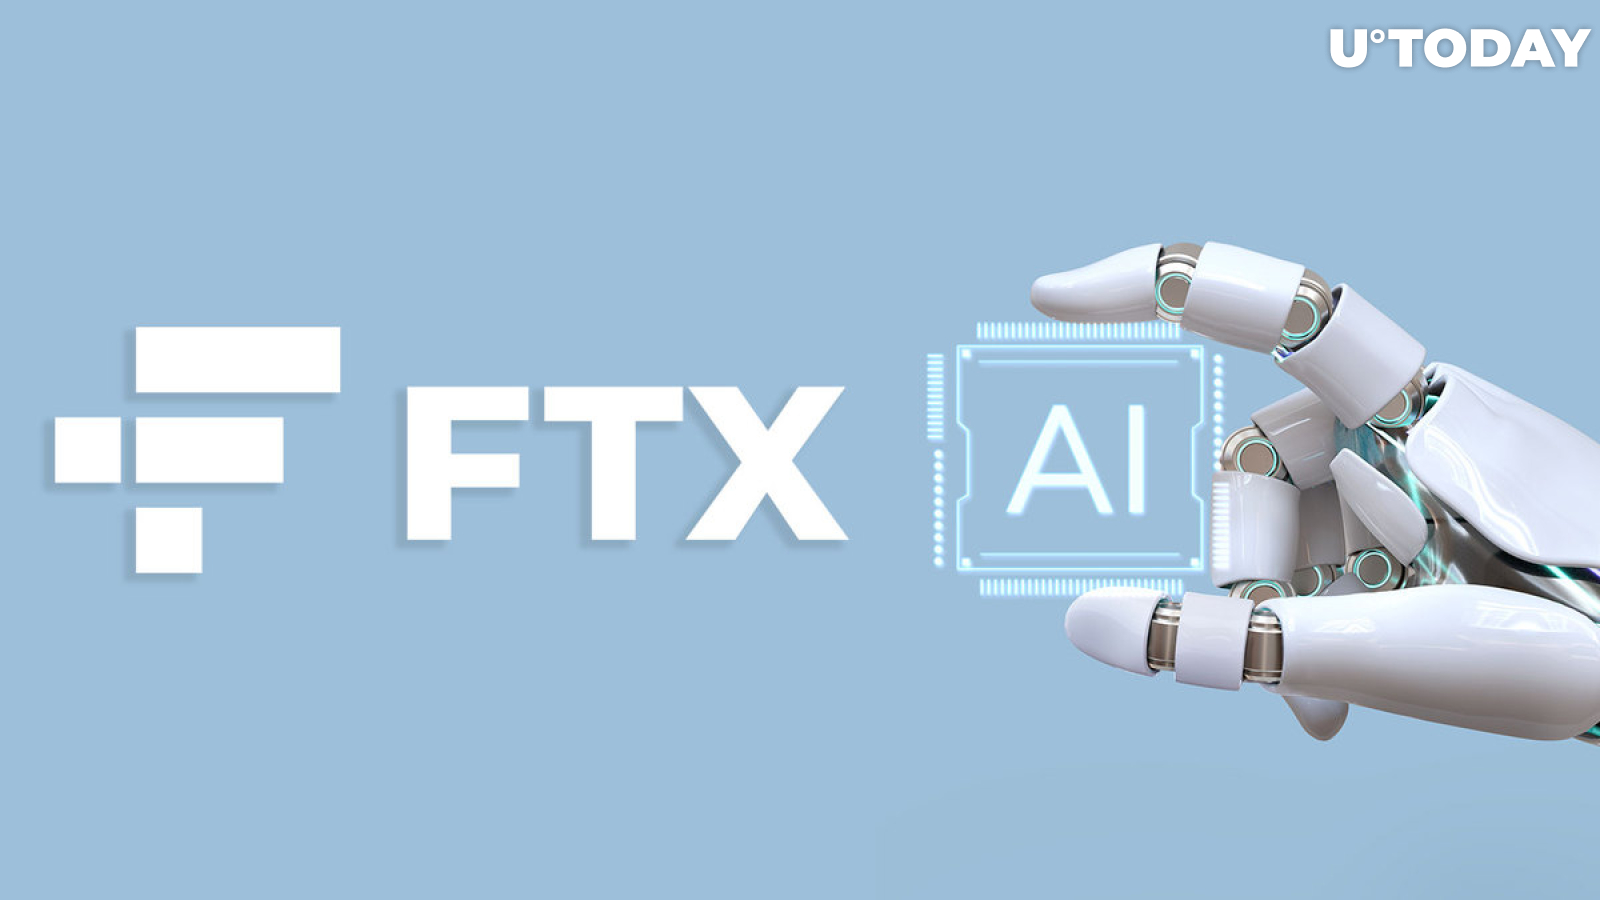 This AI Project Might Have Just Saved FTX Investors